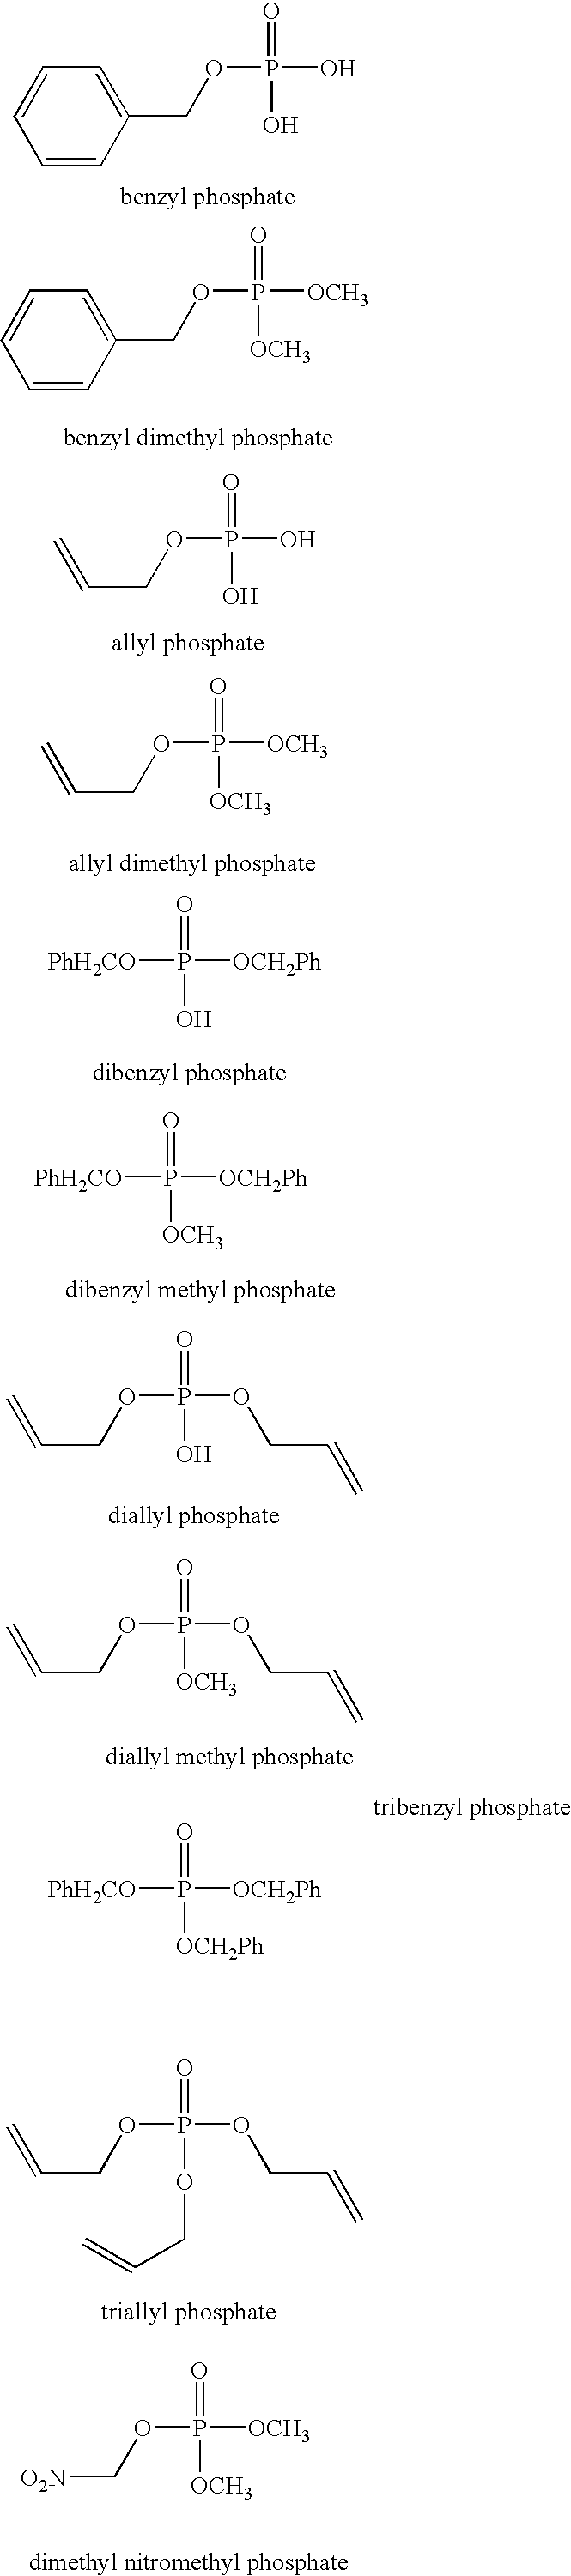 Phosphate additives for nonaqueous electrolyte rechargeable electrochemical cells